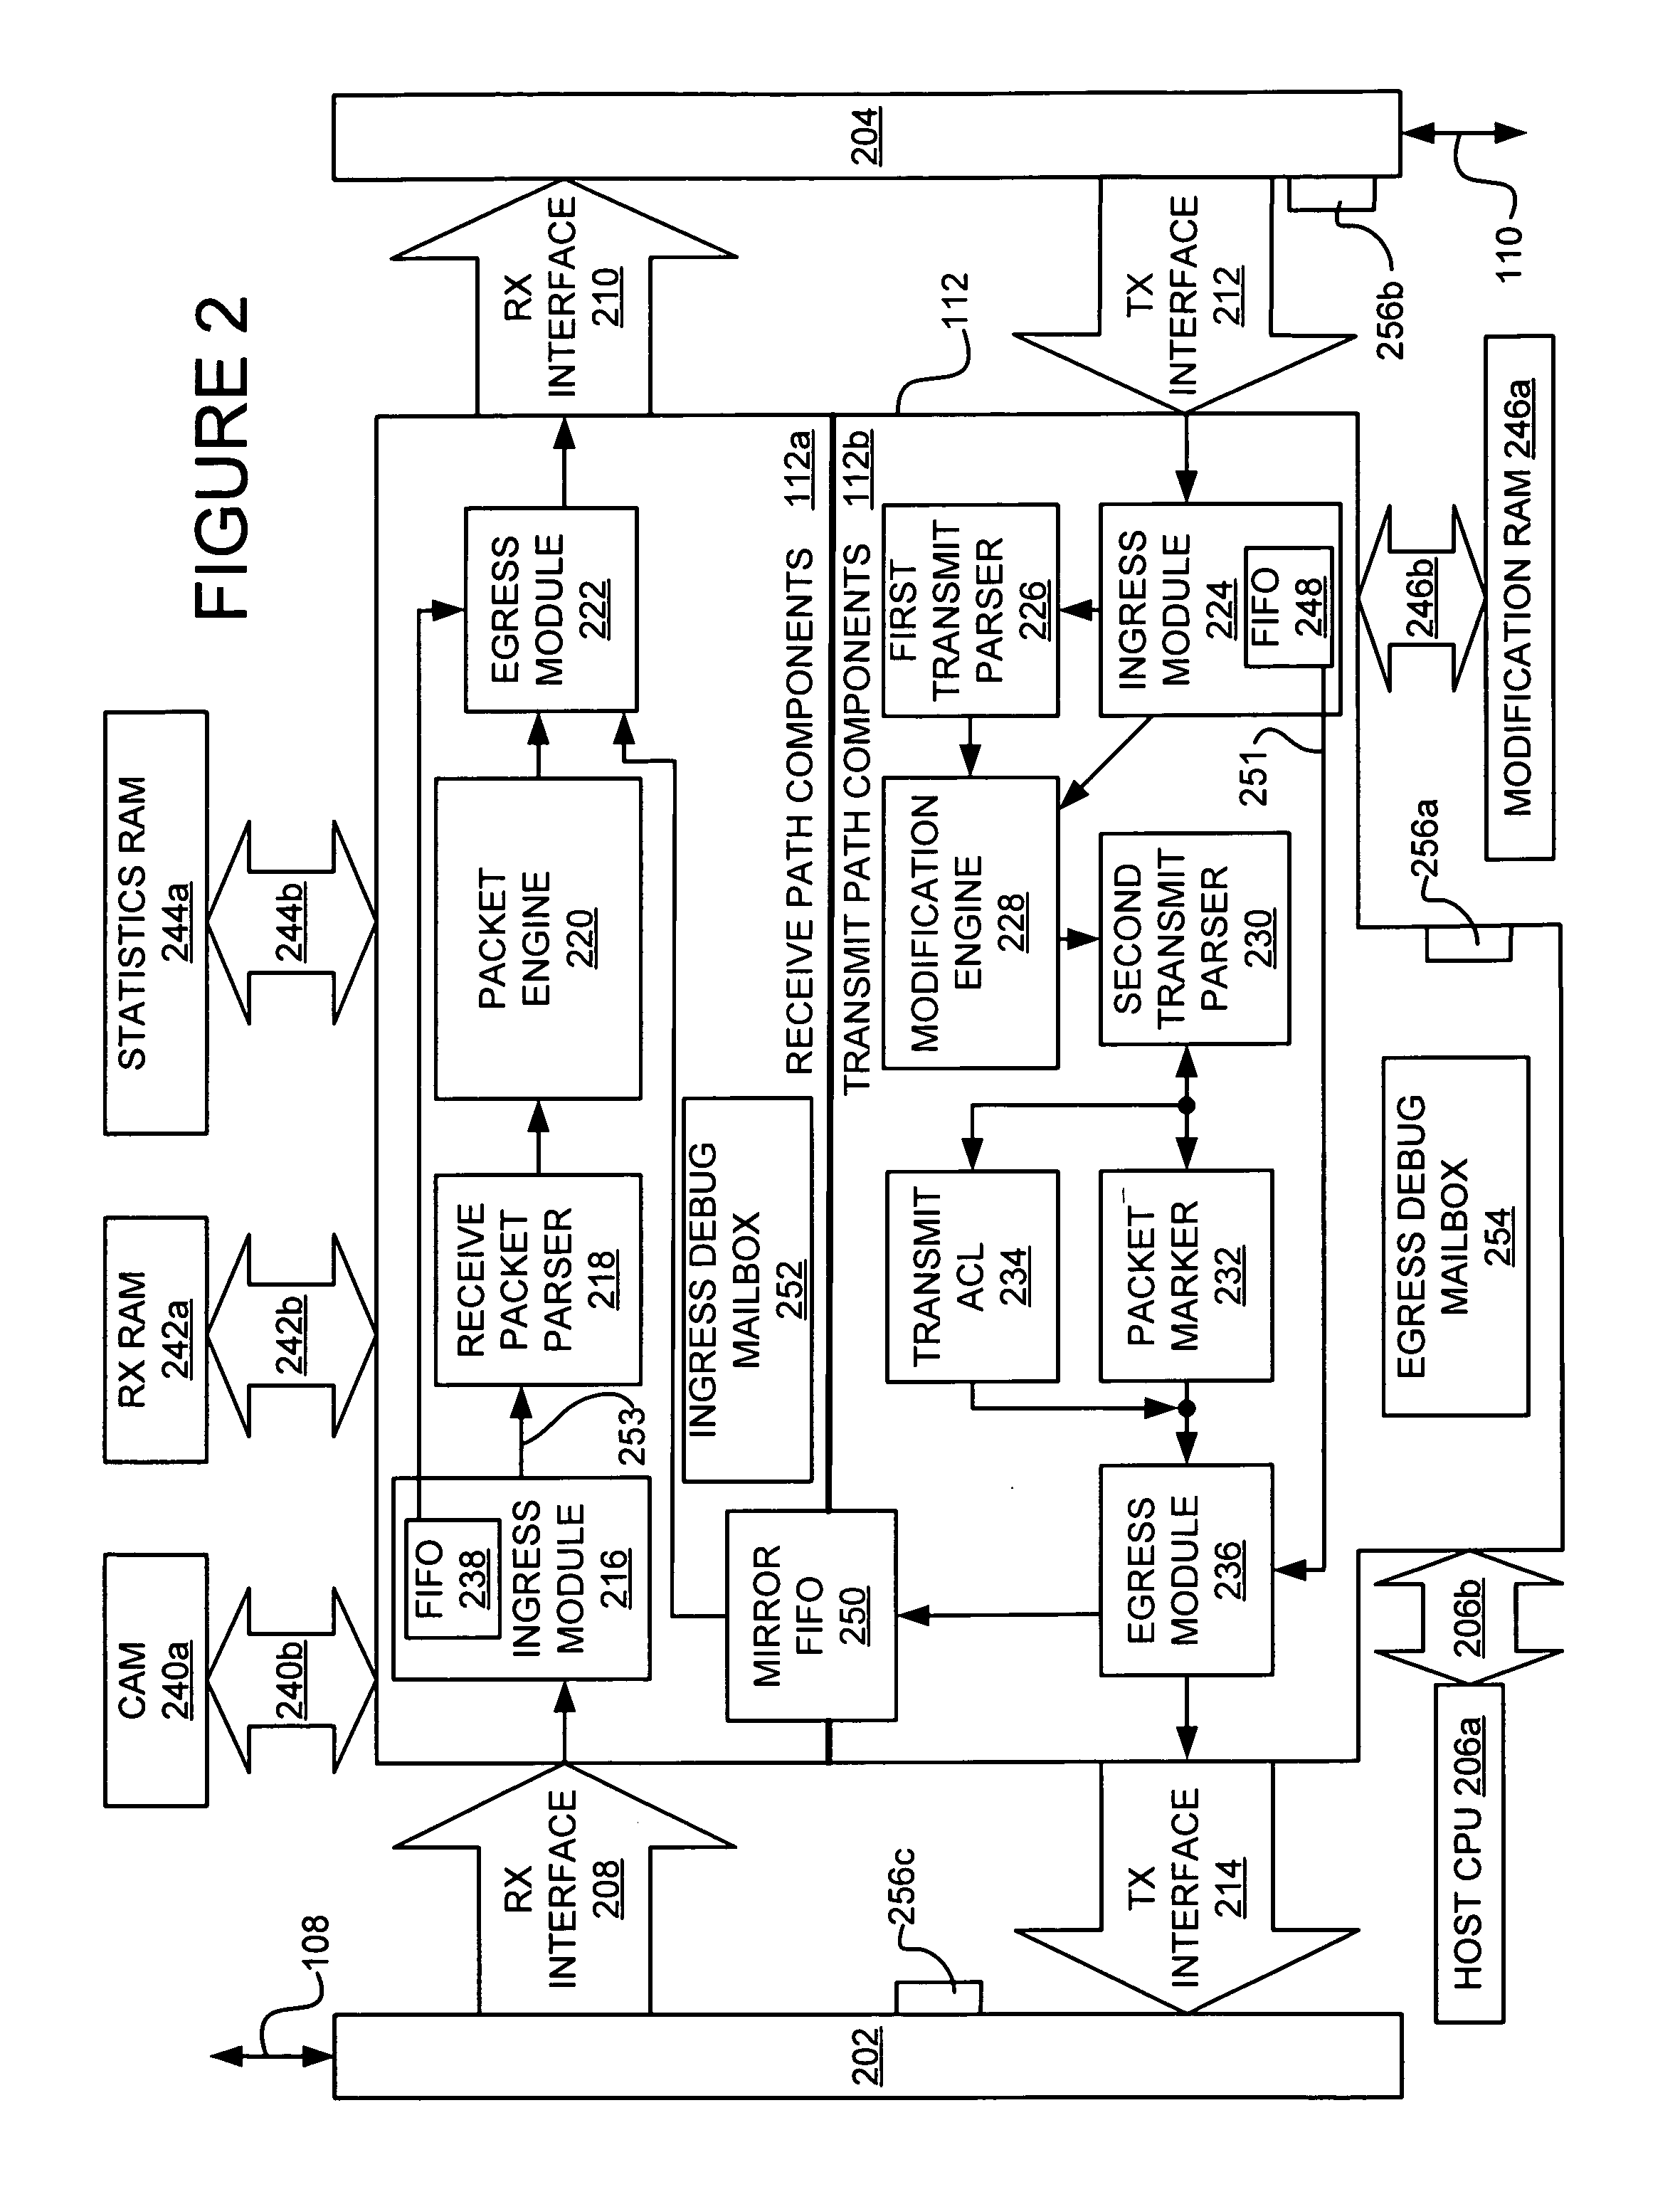 System and method for packet processor status monitoring